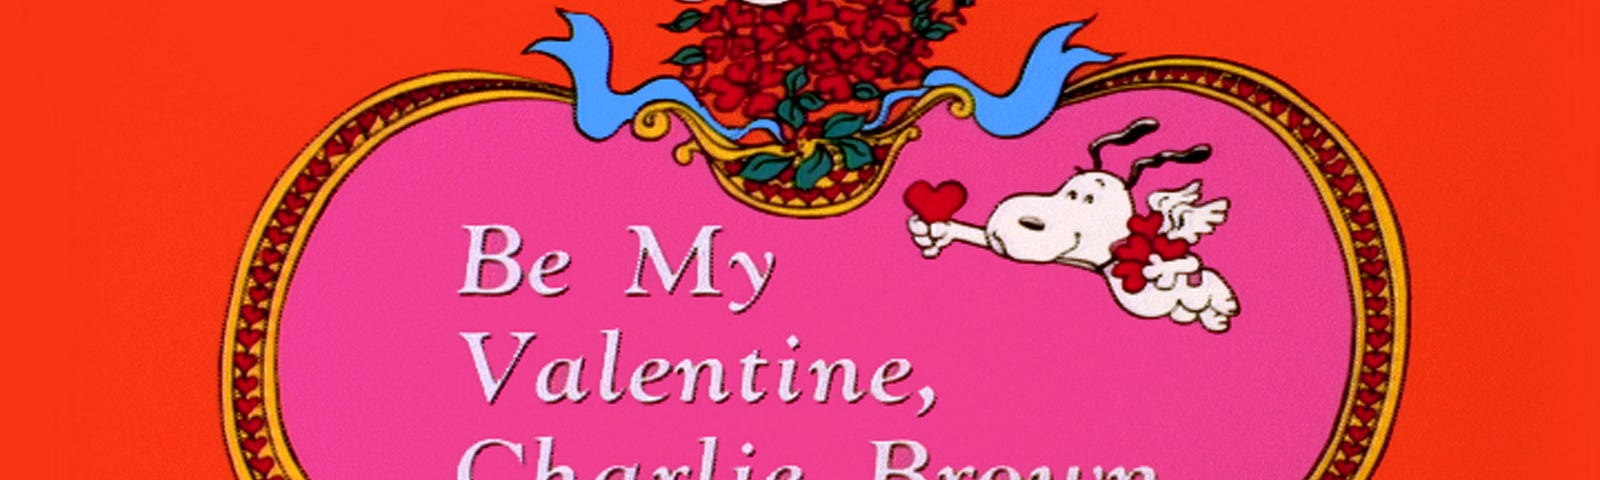 A still from the Peanuts movie, “Be My Valentine, Charlie Brown” by Charles M. Schulz.